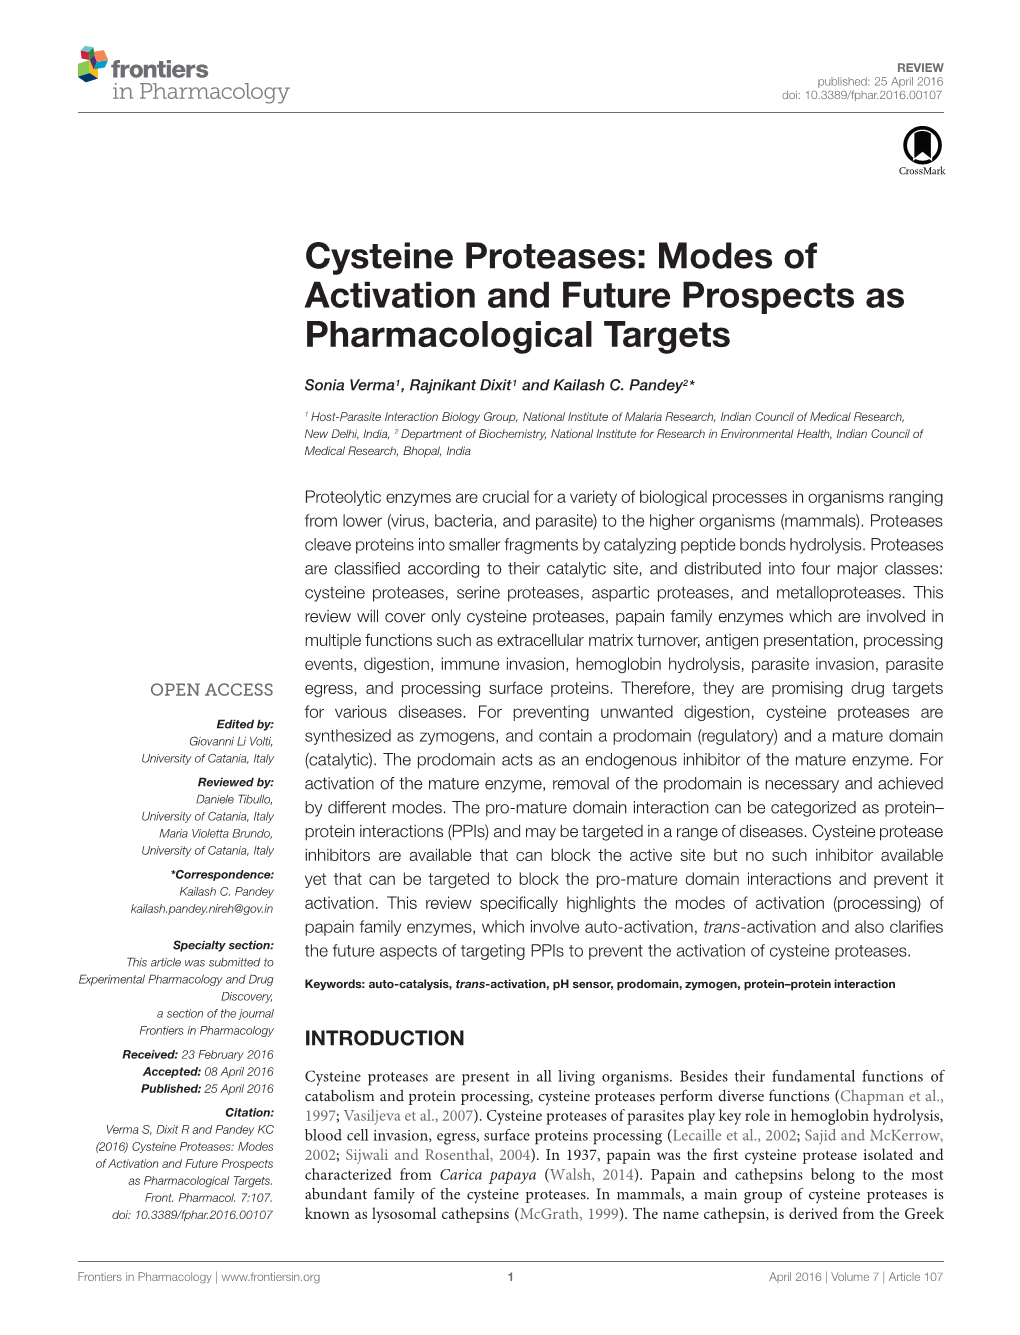 Cysteine Proteases: Modes of Activation and Future Prospects As Pharmacological Targets